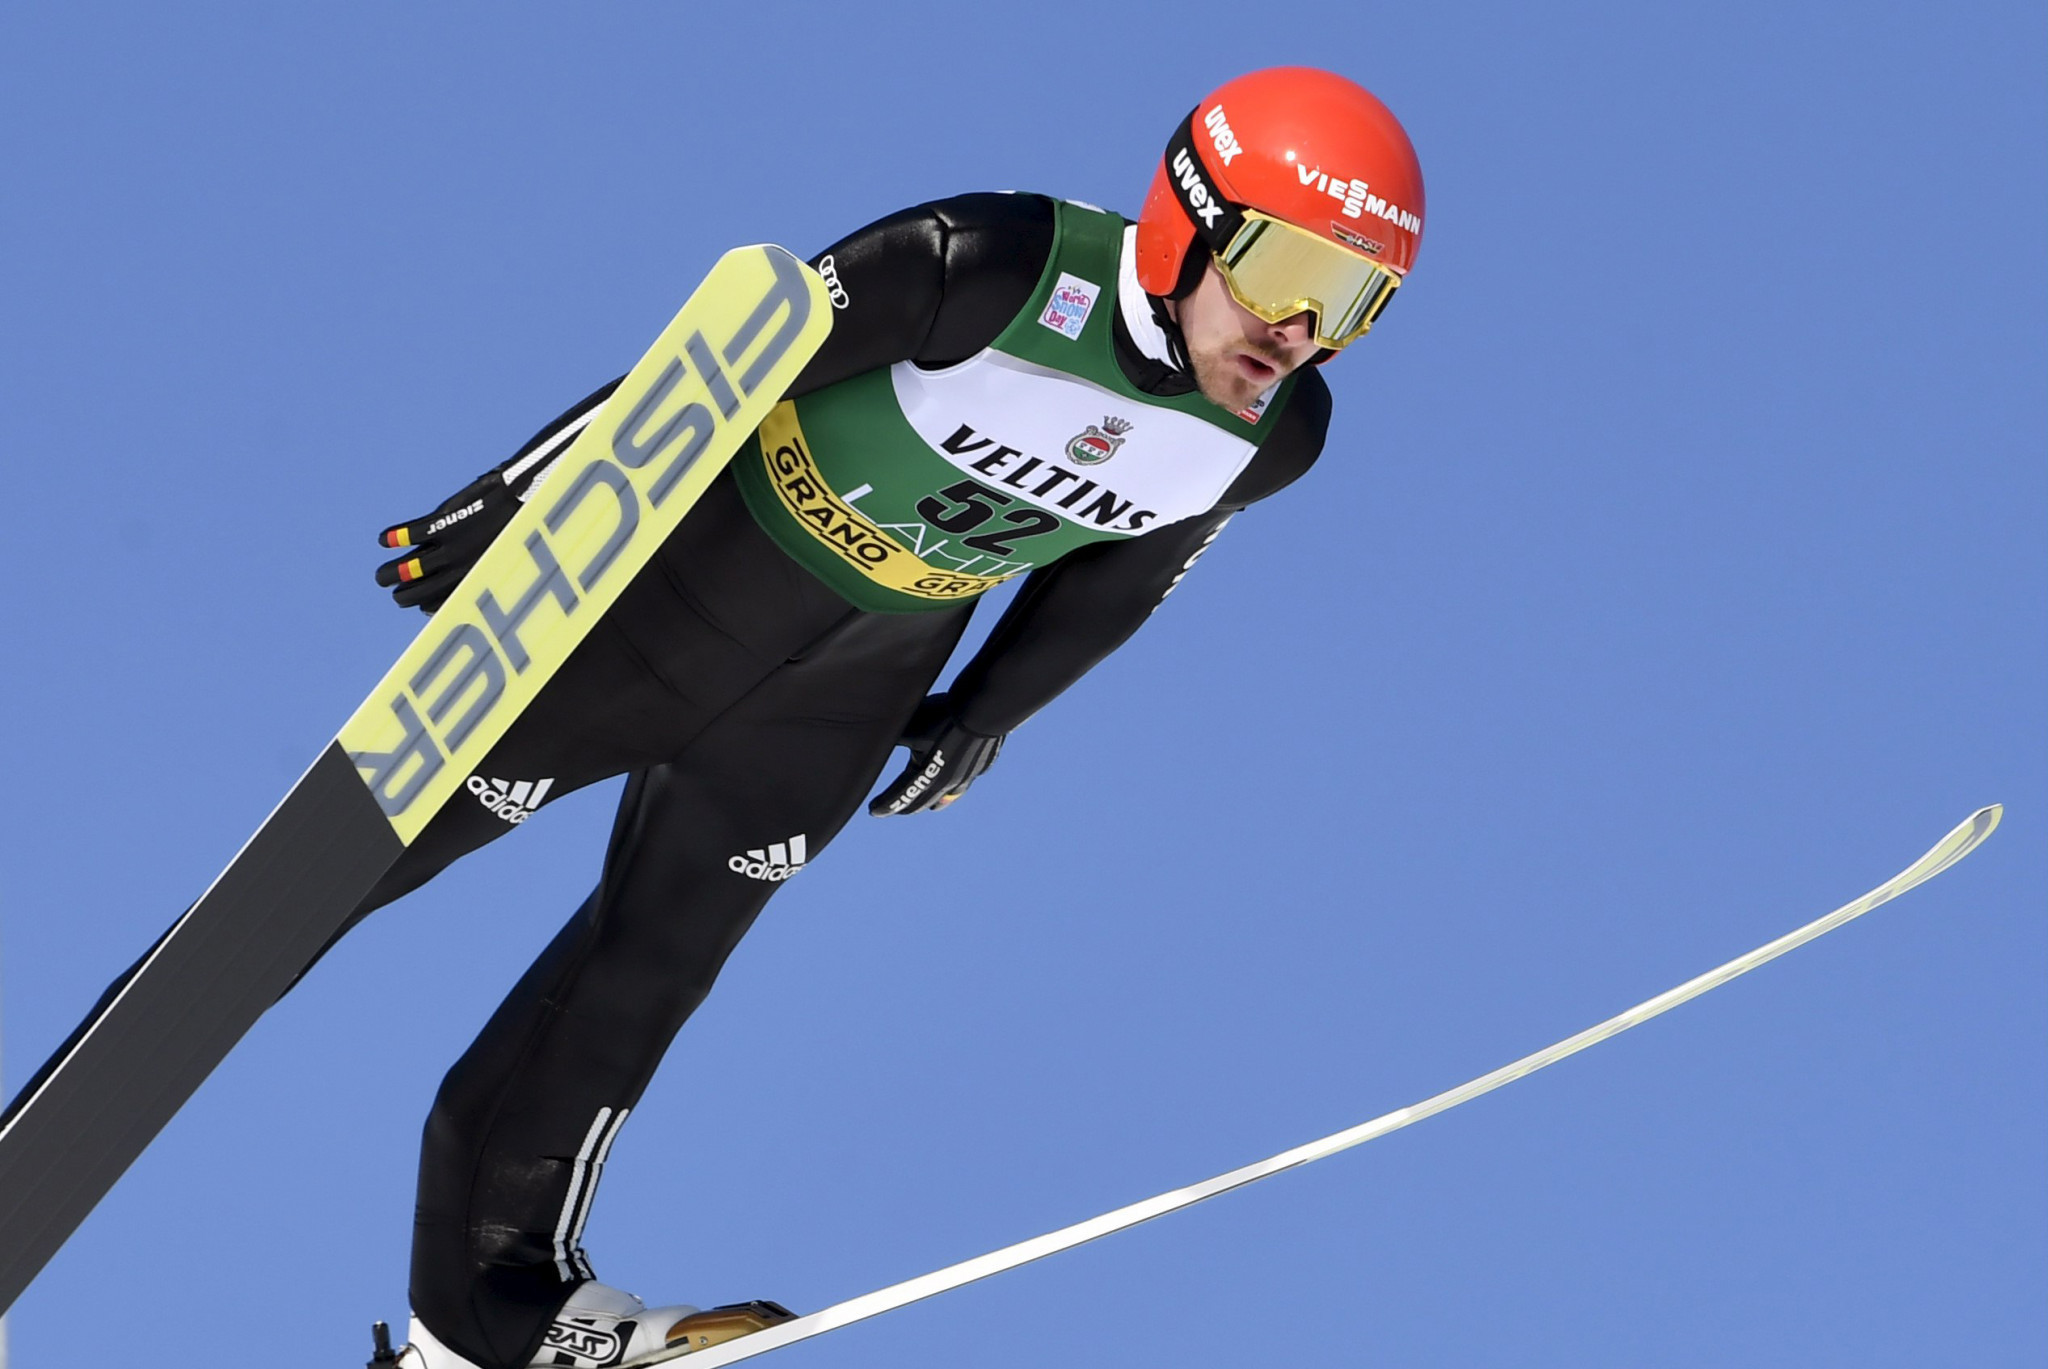 Fabian Riessle of Germany finished second in the FIS Nordic Combined World Cup in Oslo ©Getty Images